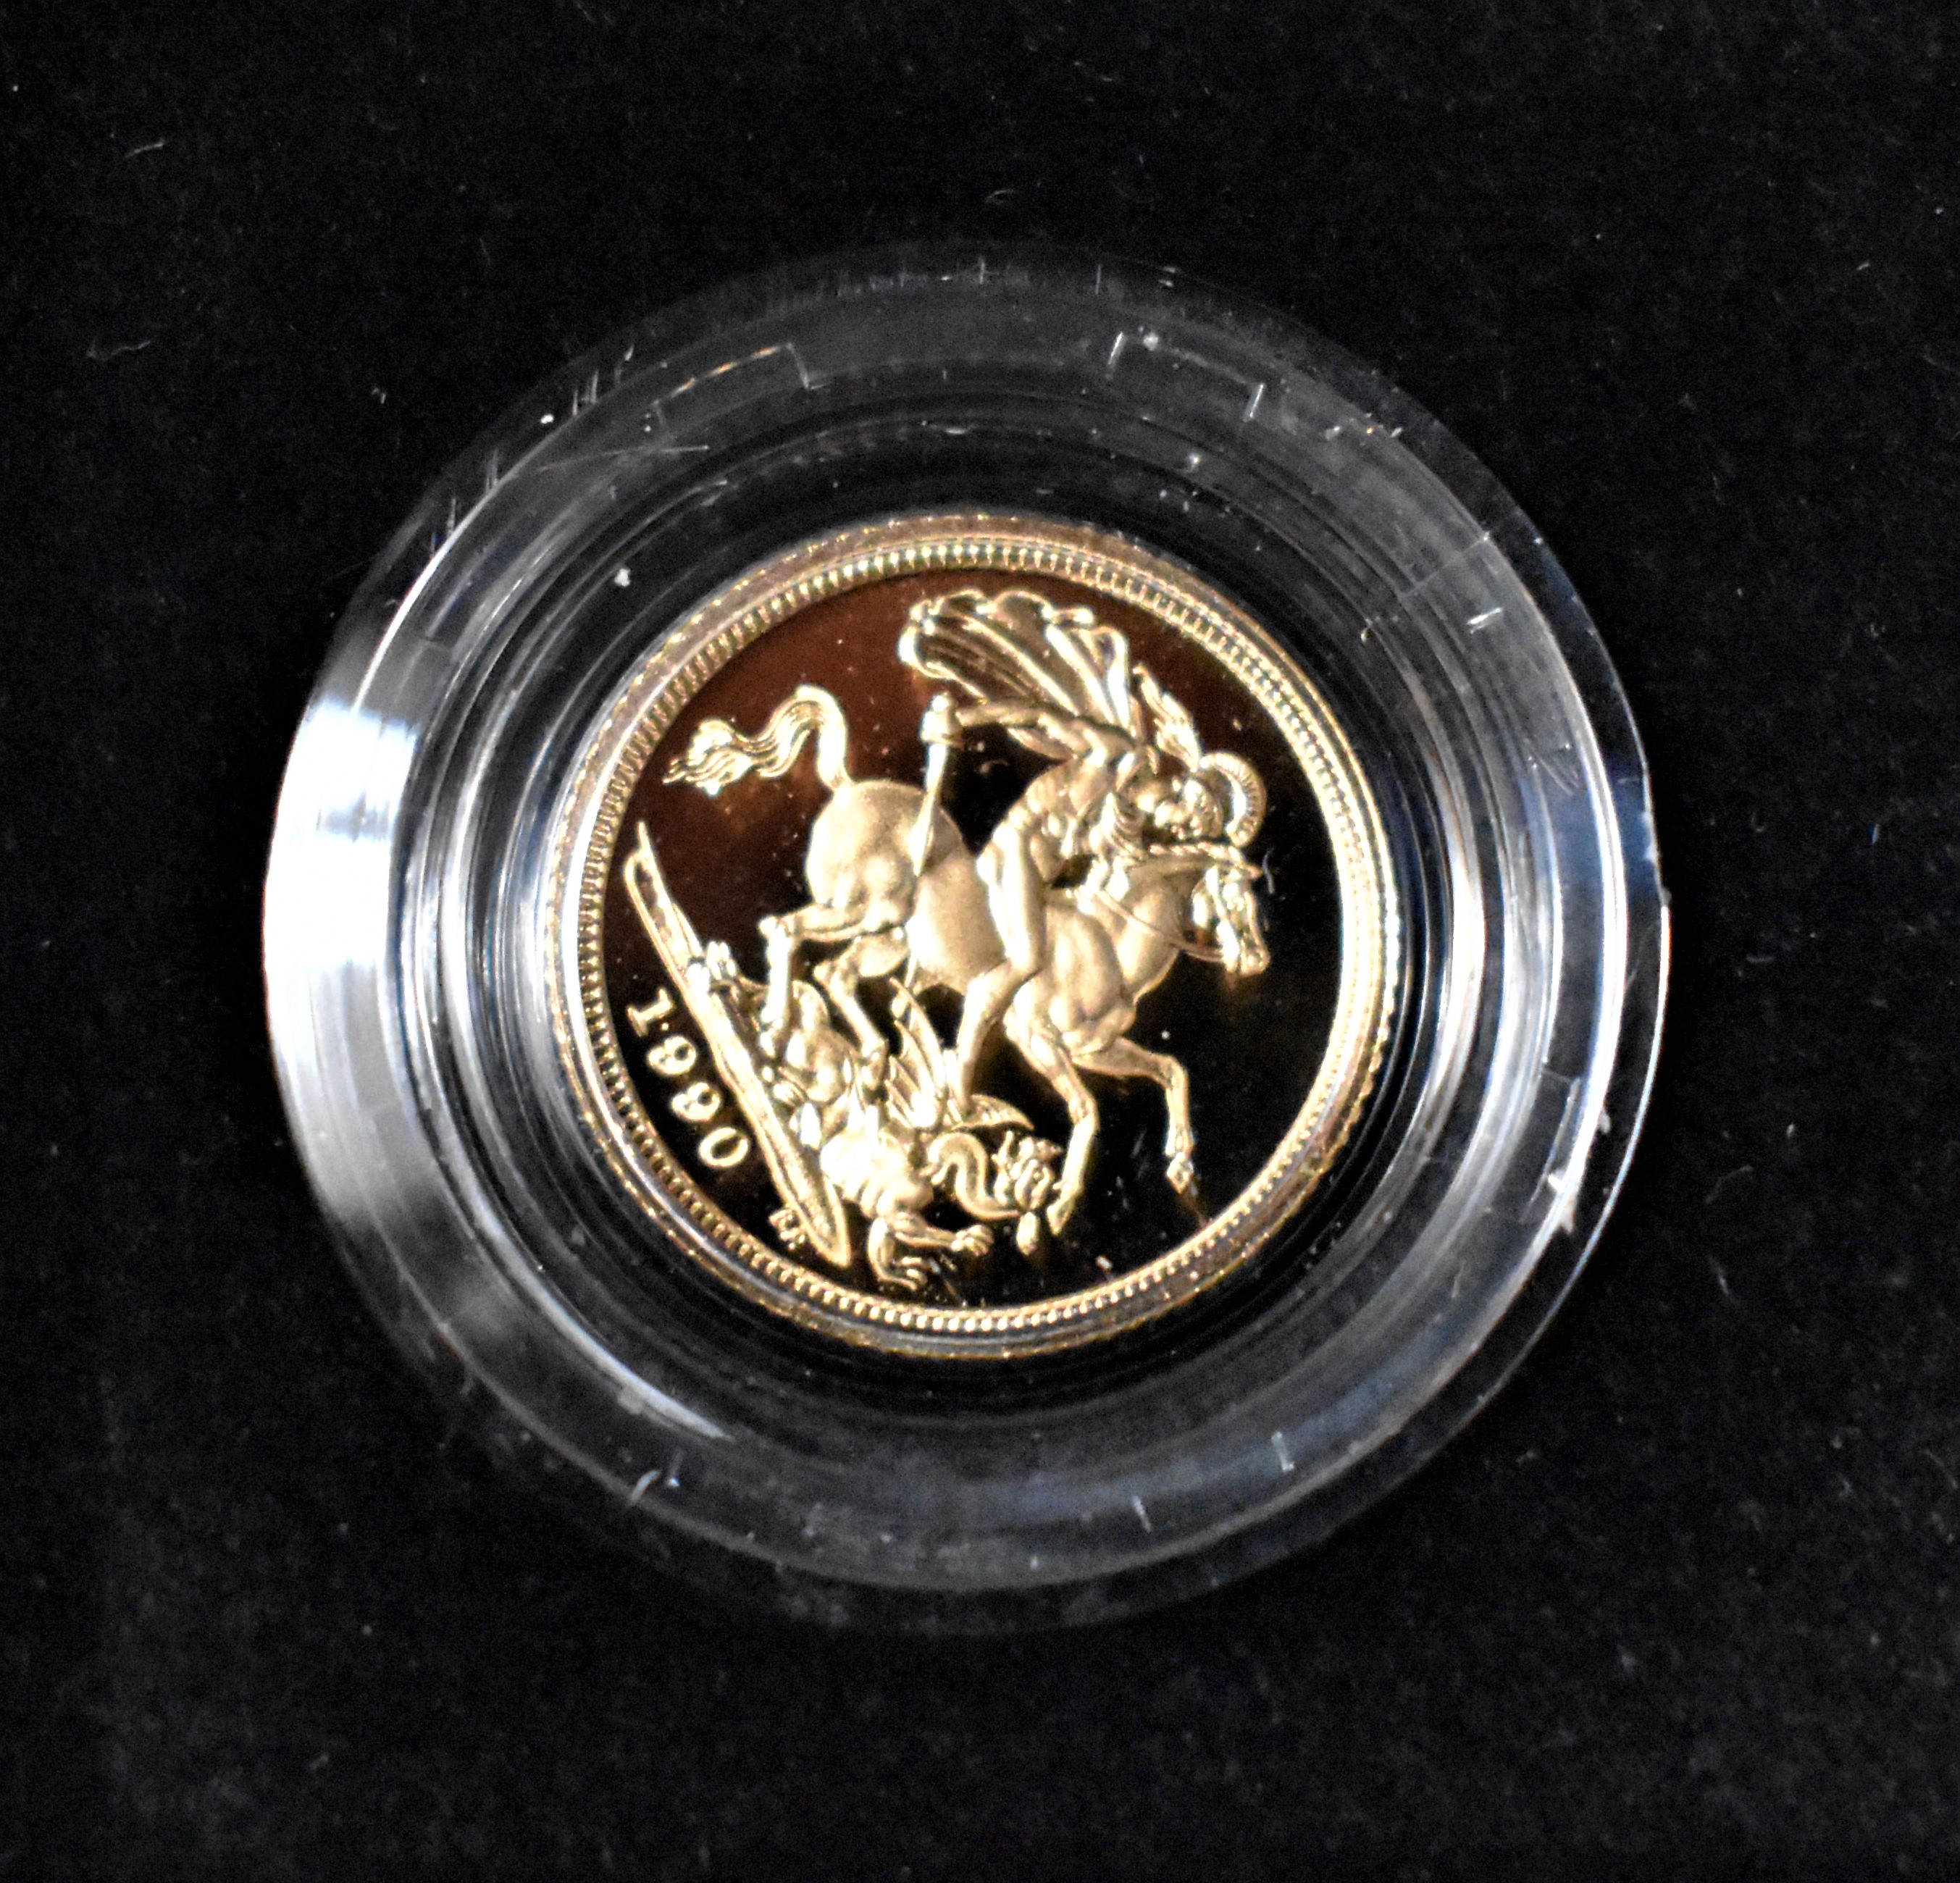 Gold Proof Half Sovereign 1990, Royal Mint 274 of 4231, Boxed with Certificate. - Image 2 of 2